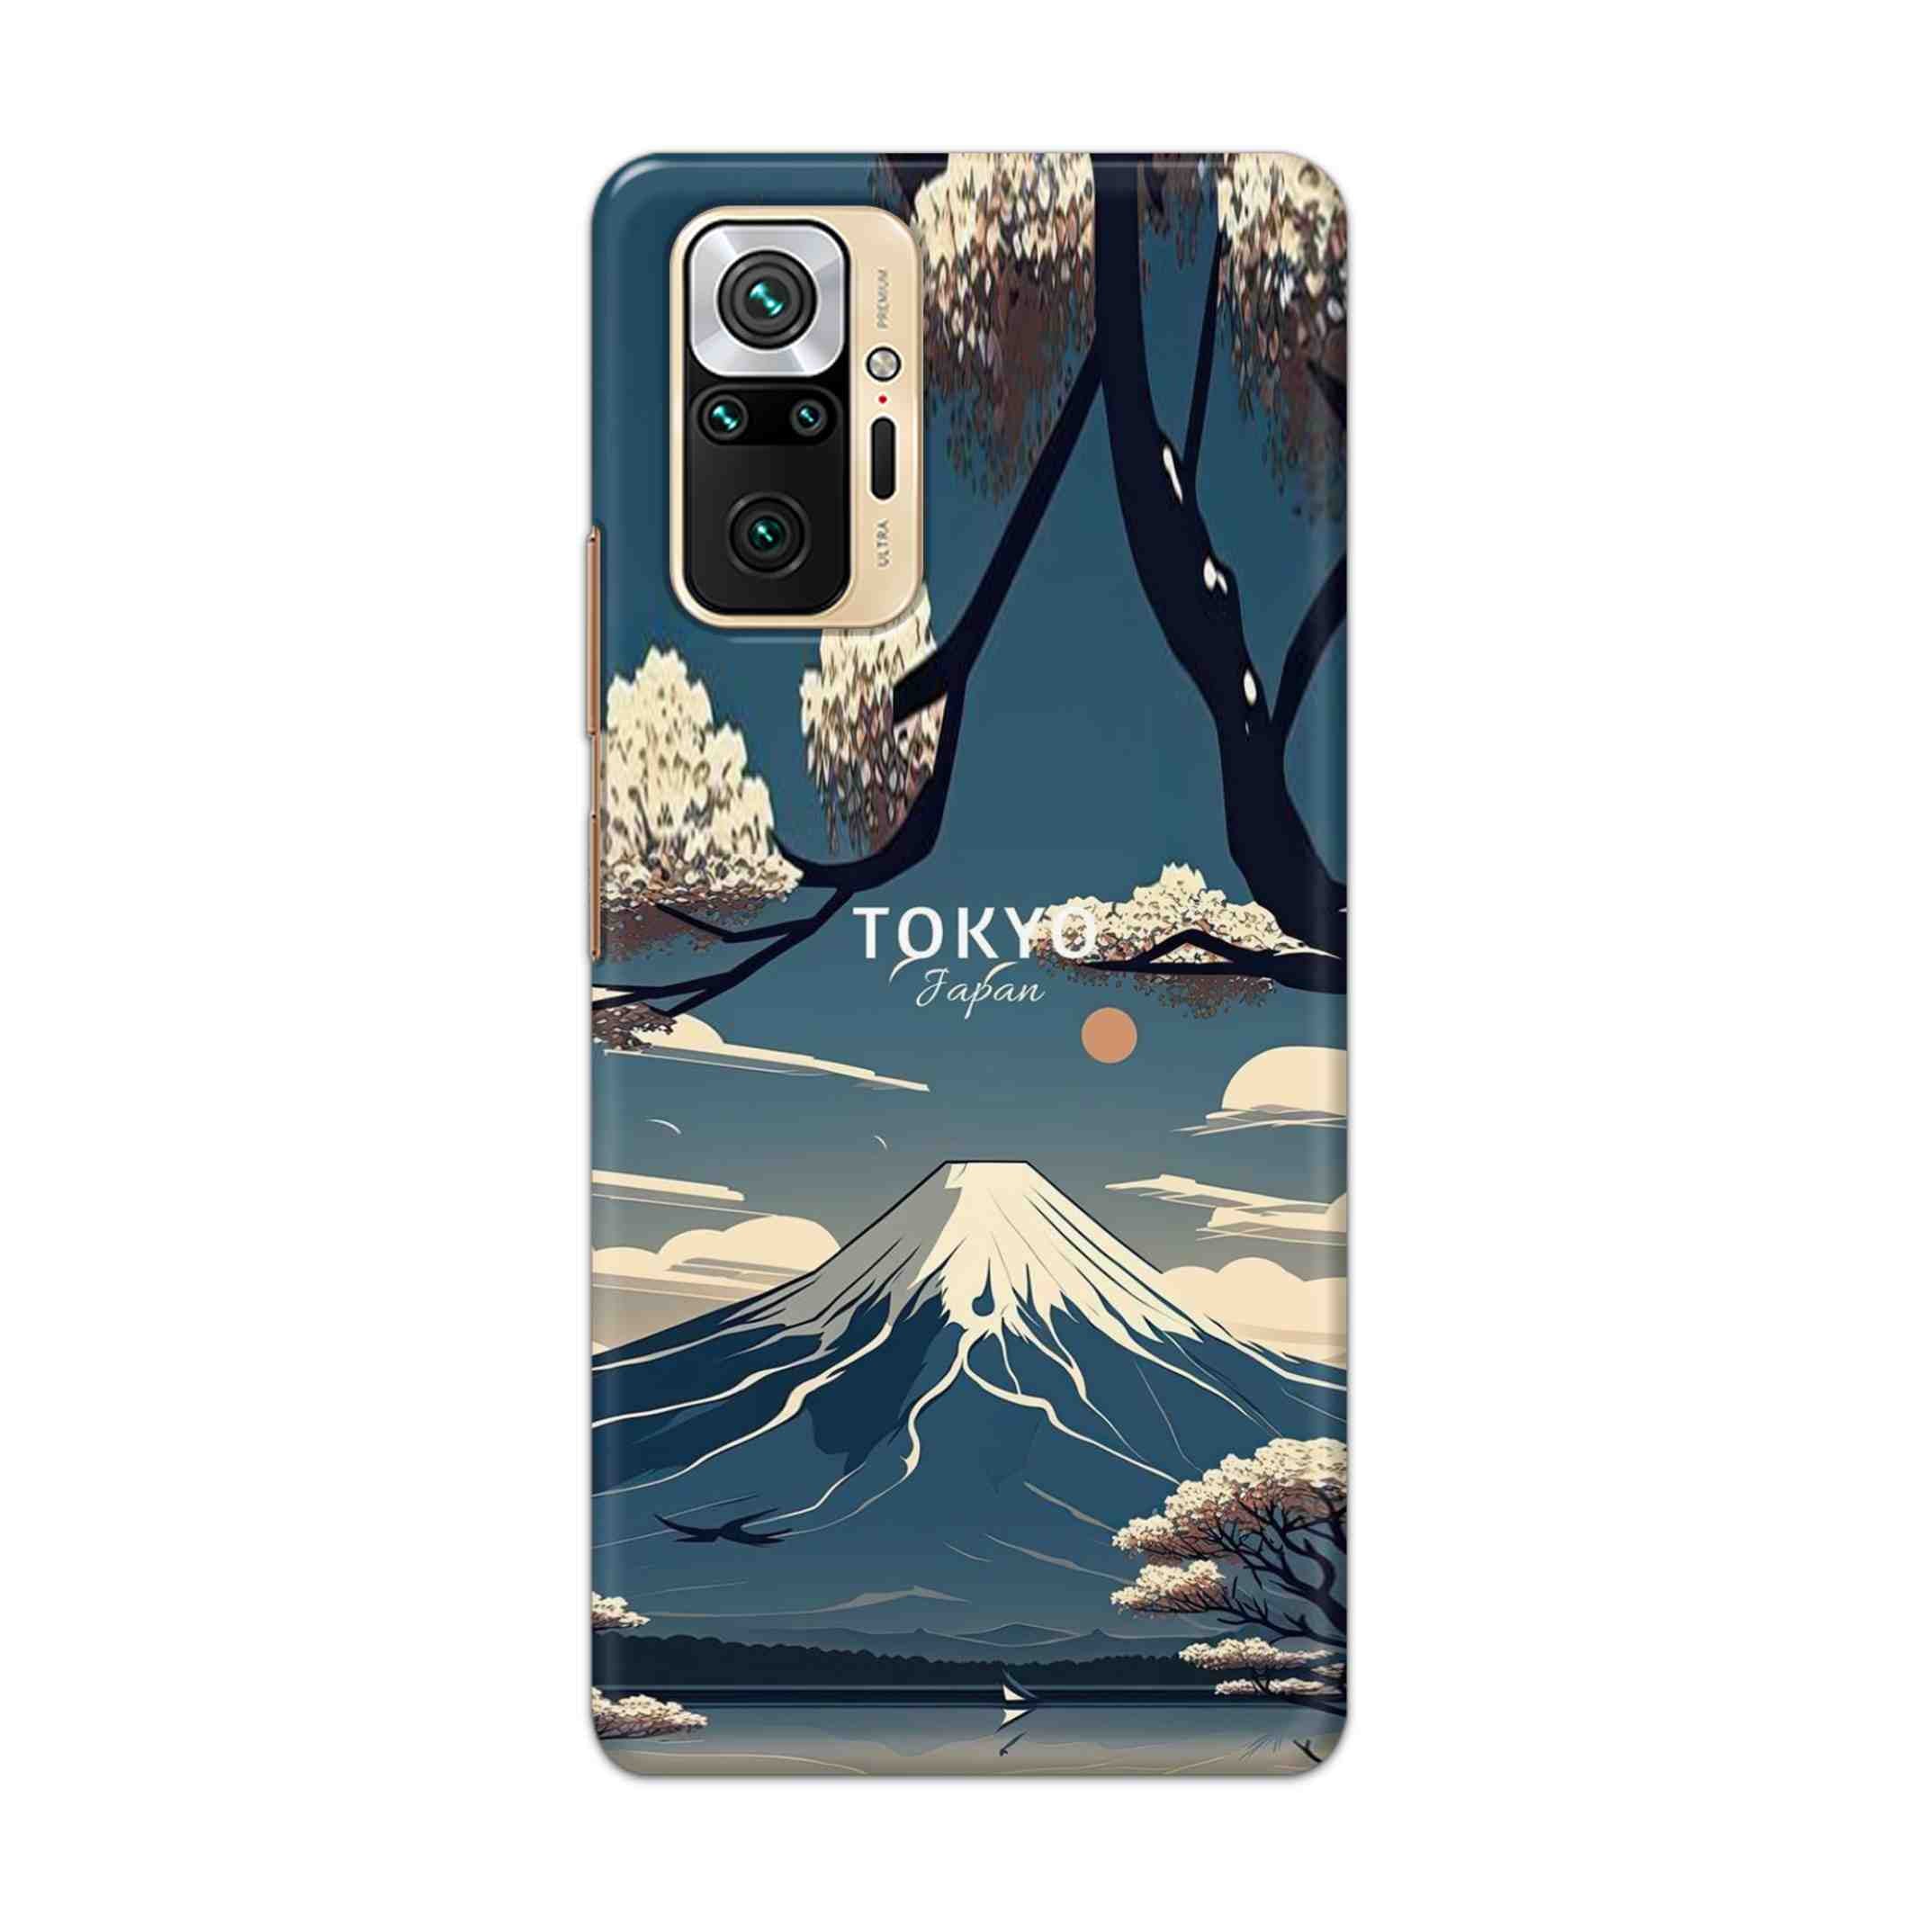 Buy Tokyo Hard Back Mobile Phone Case Cover For Redmi Note 10 Pro Online